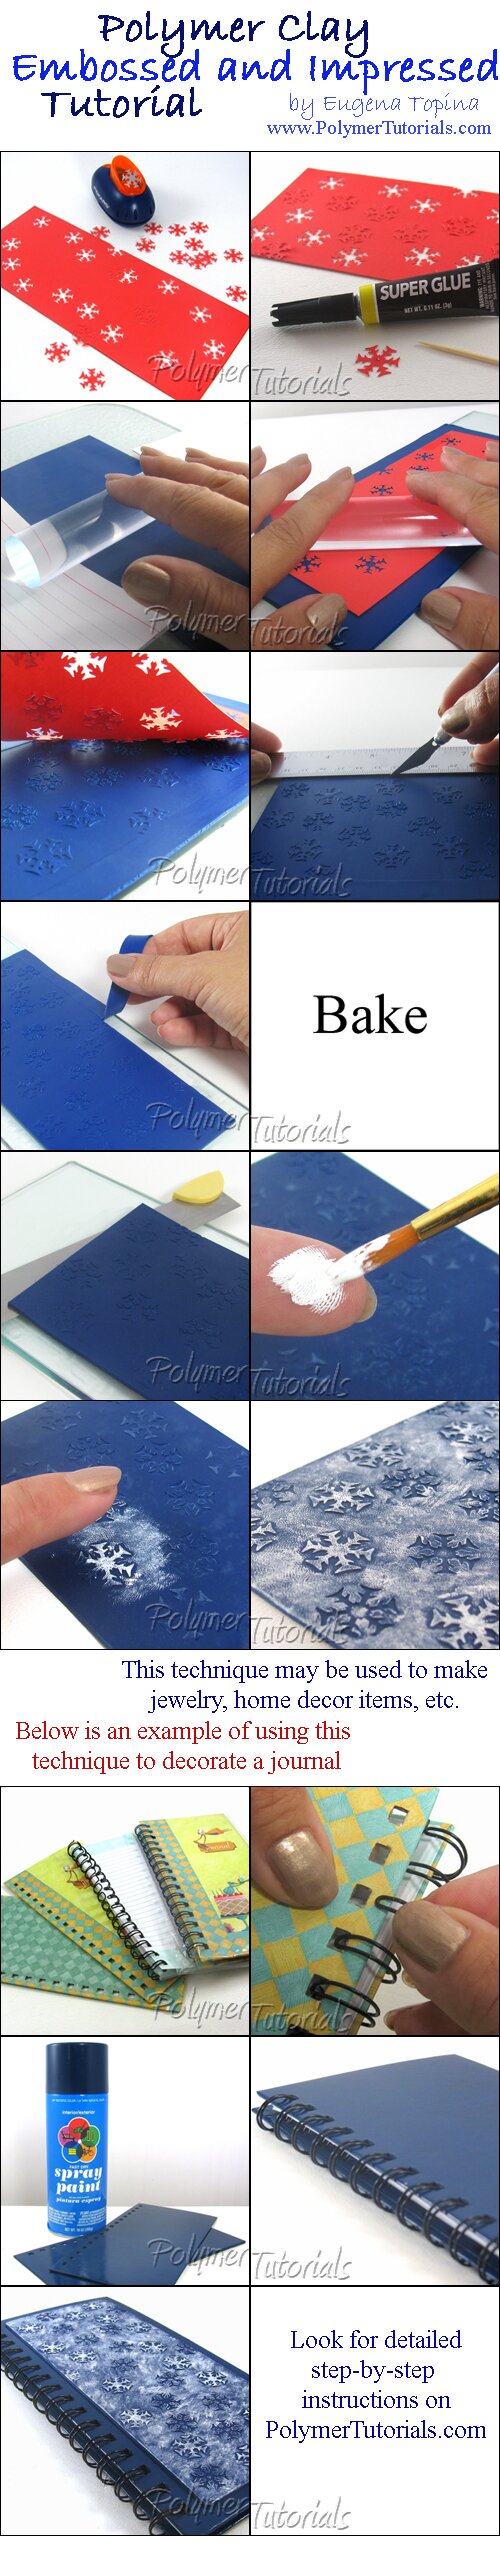 Image for Free Tutorial Embossed and Impressed Polymer Clay